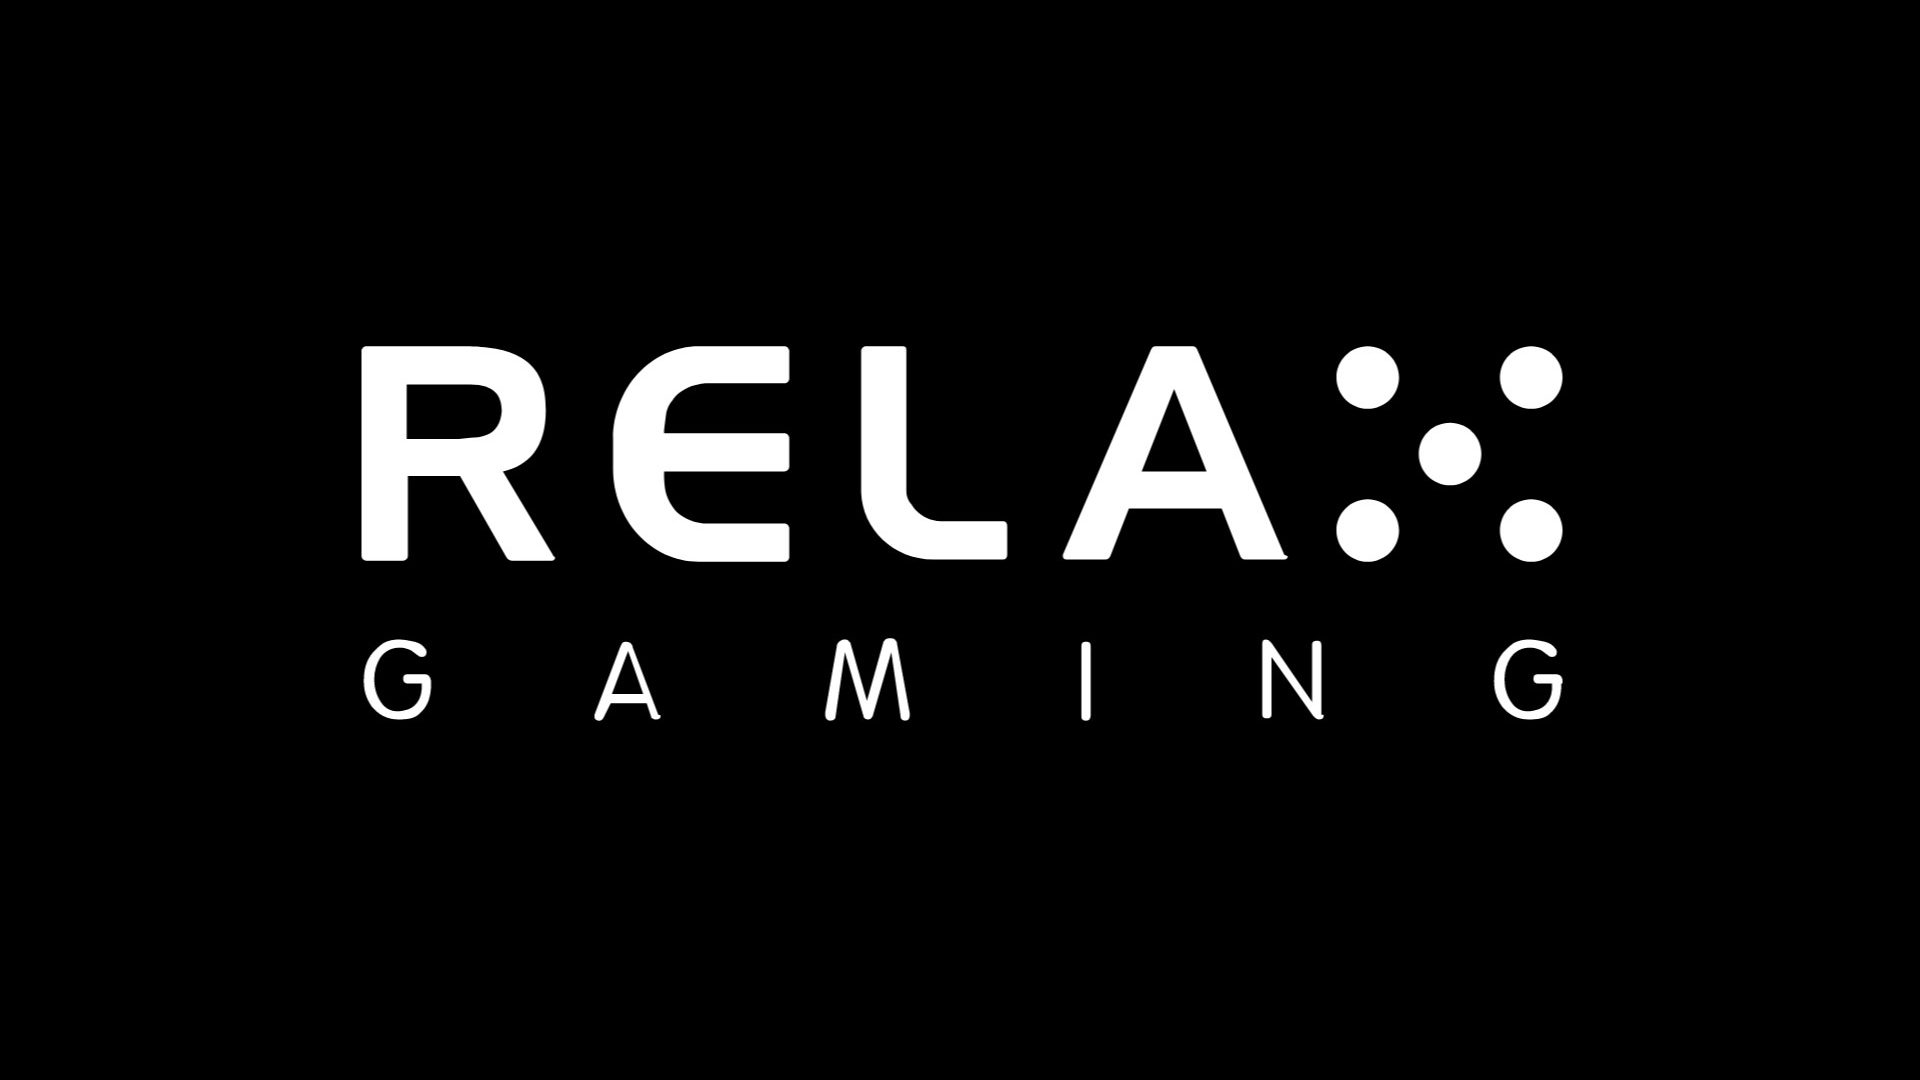 Relax Gaming expands Powered By platform with 1X2 Network deal